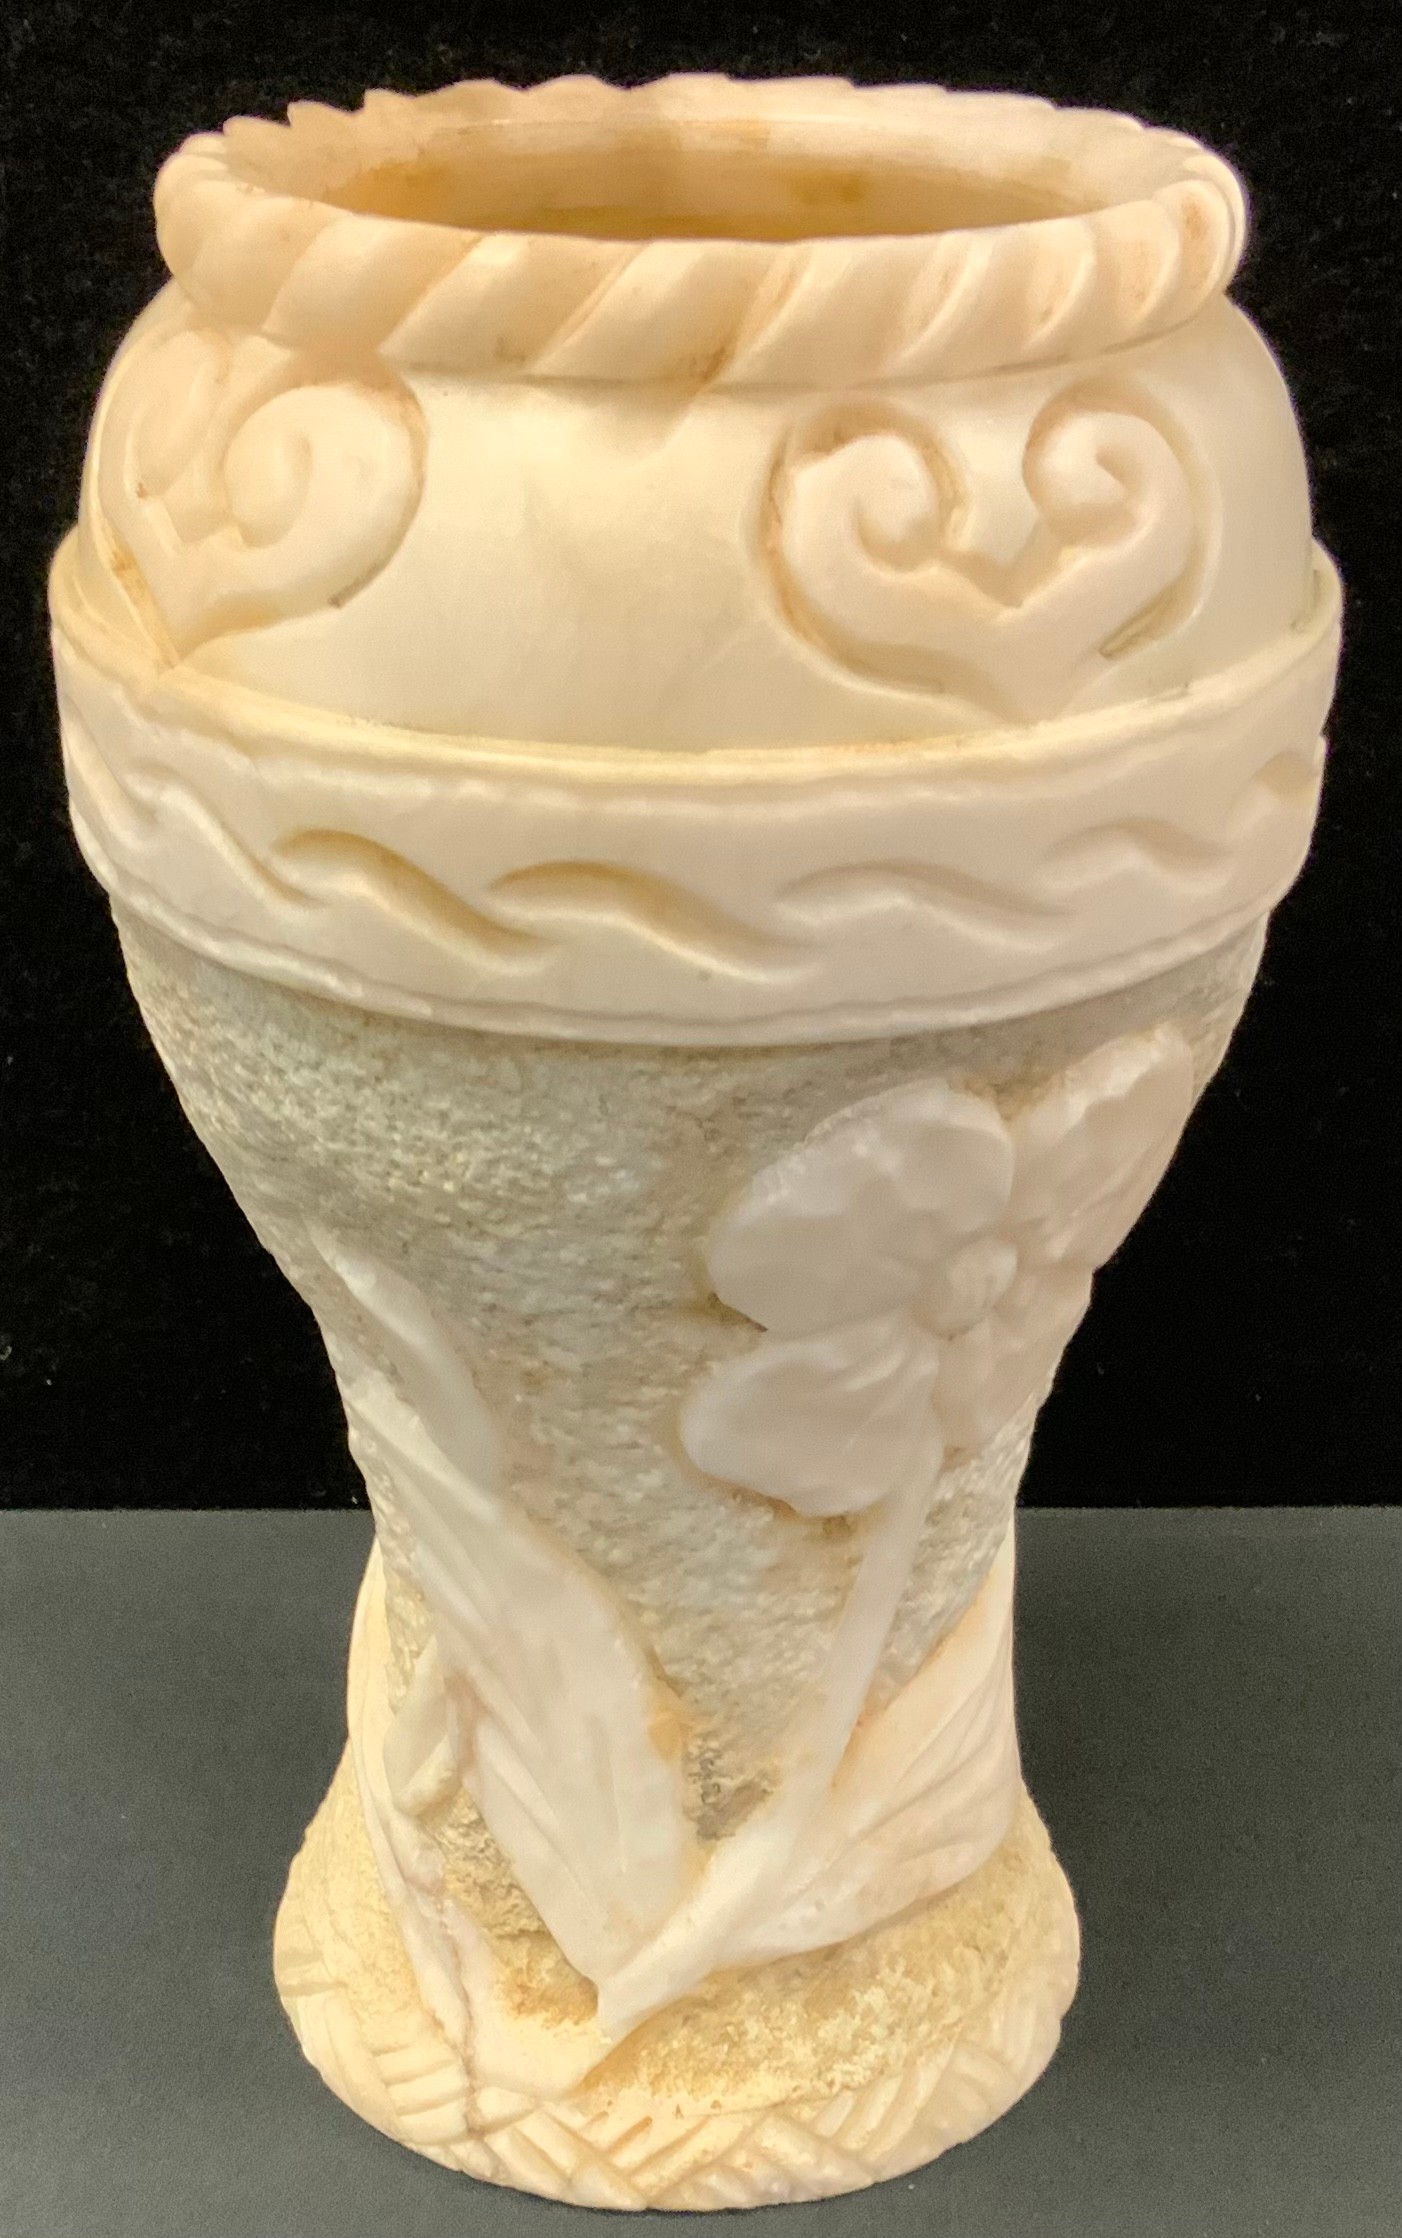 A large veined creamy white stone vase, possibly marble, floral ruff textured body beneath smooth